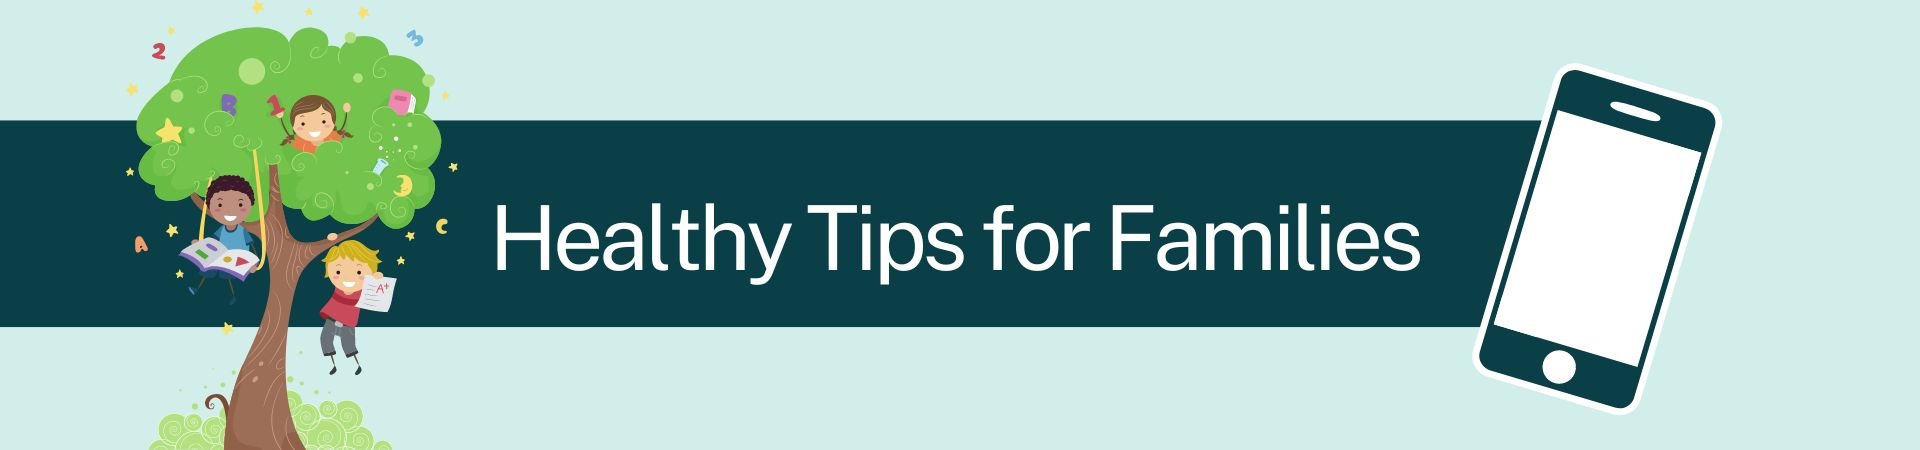 Header image for Healthy Tips for Families